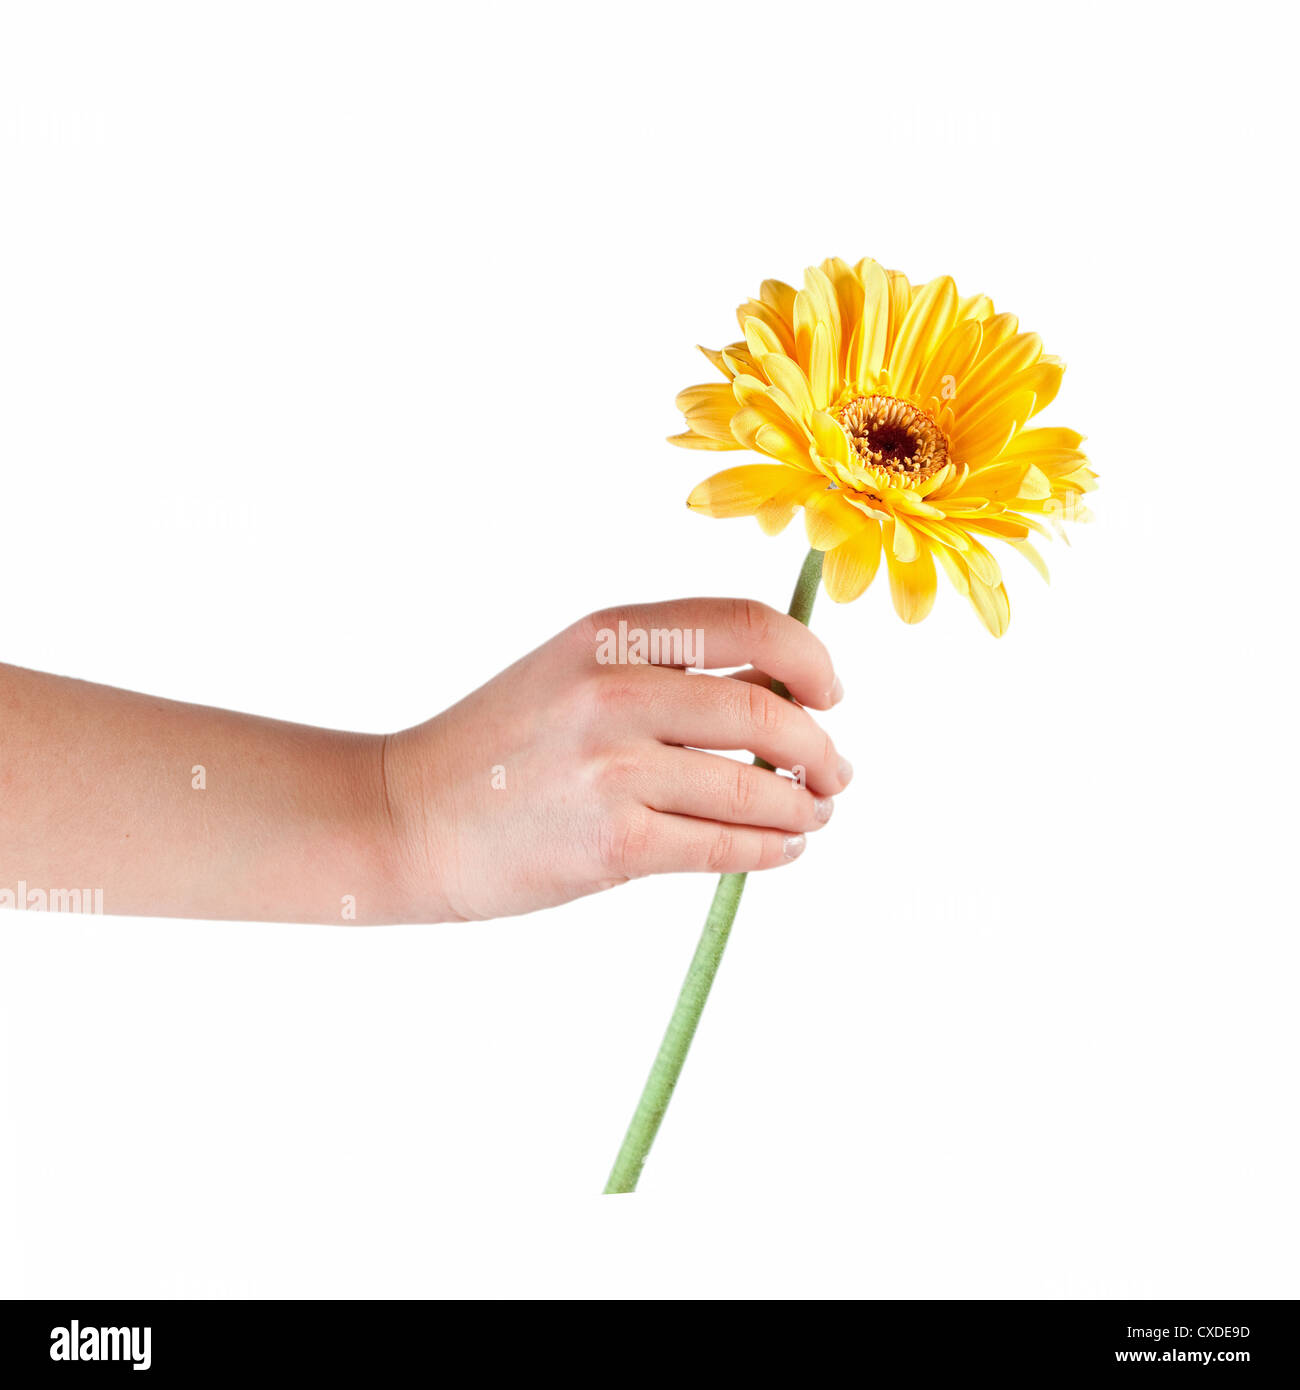 Flower in hand isolated on white background Stock Photo